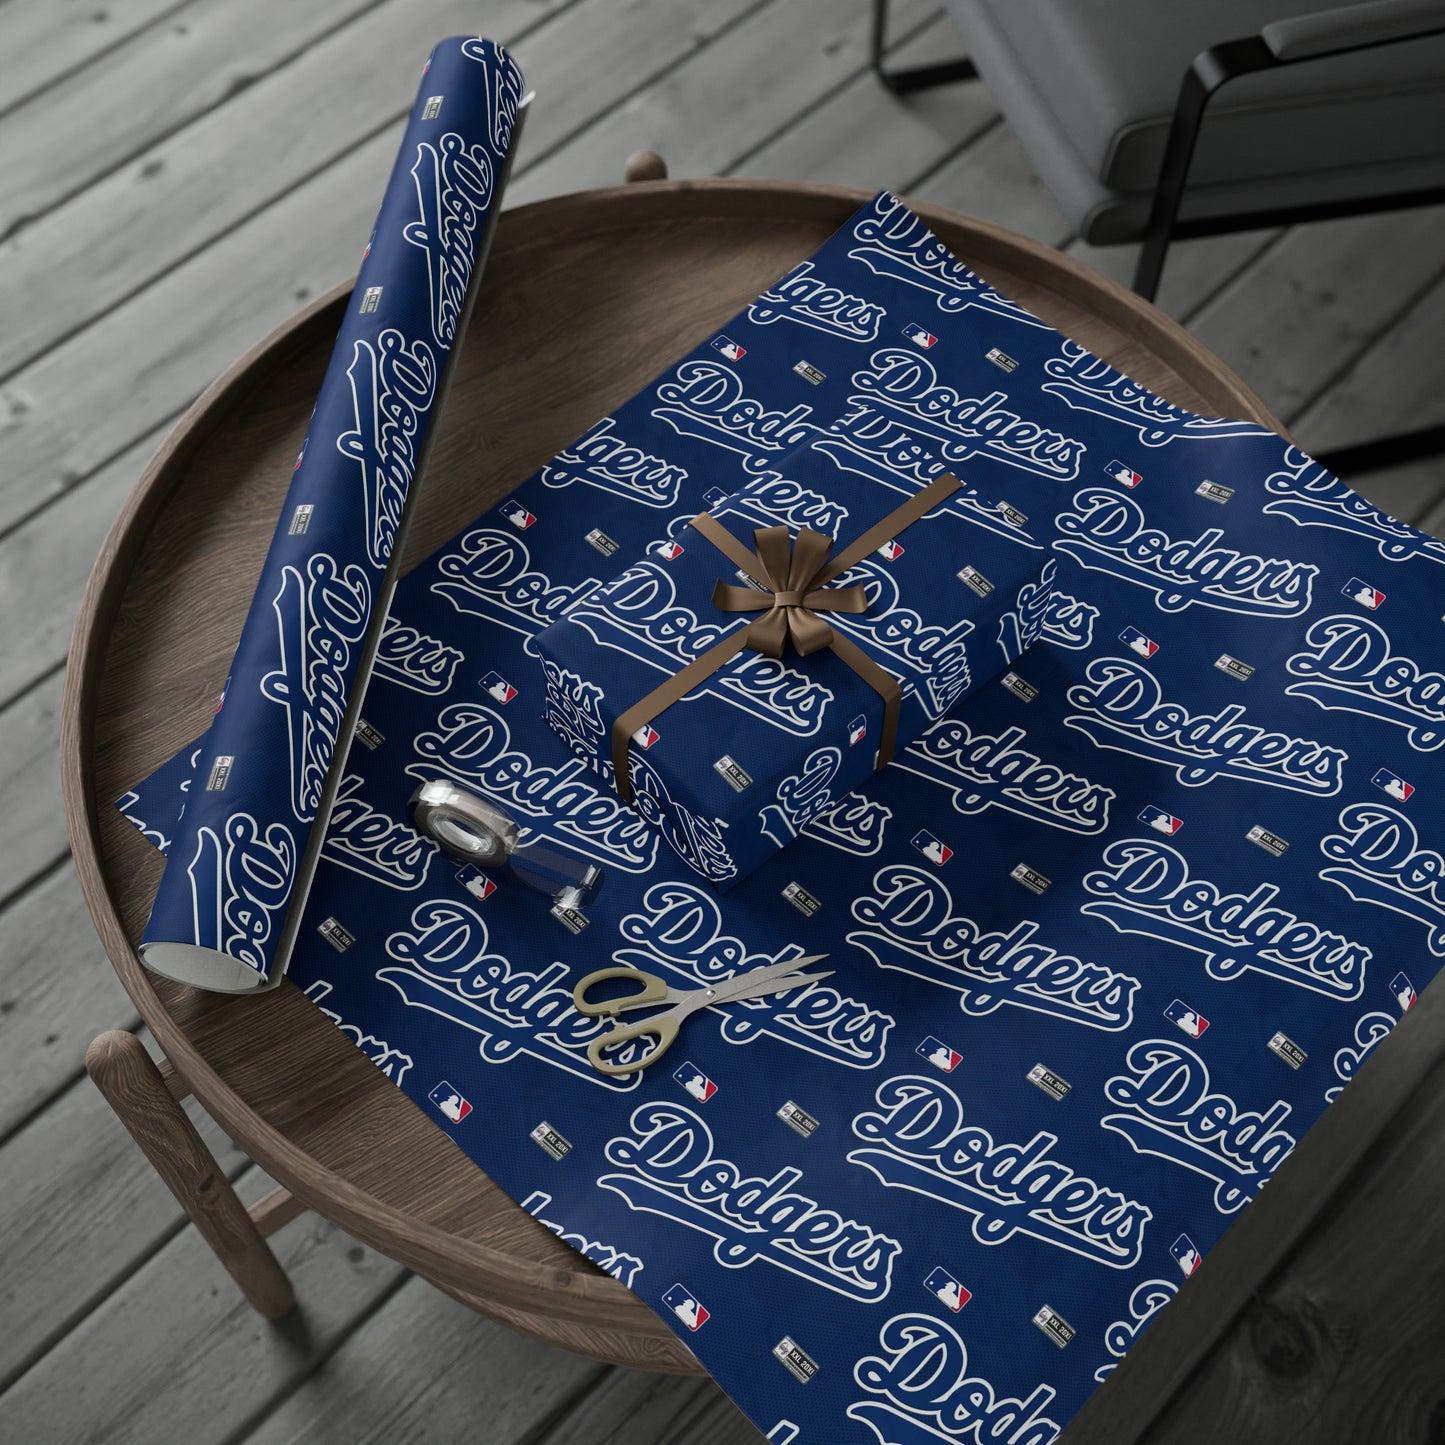 Los Angeles Dodgers Baseball MLB Birthday Gift Wrapping Paper Holiday